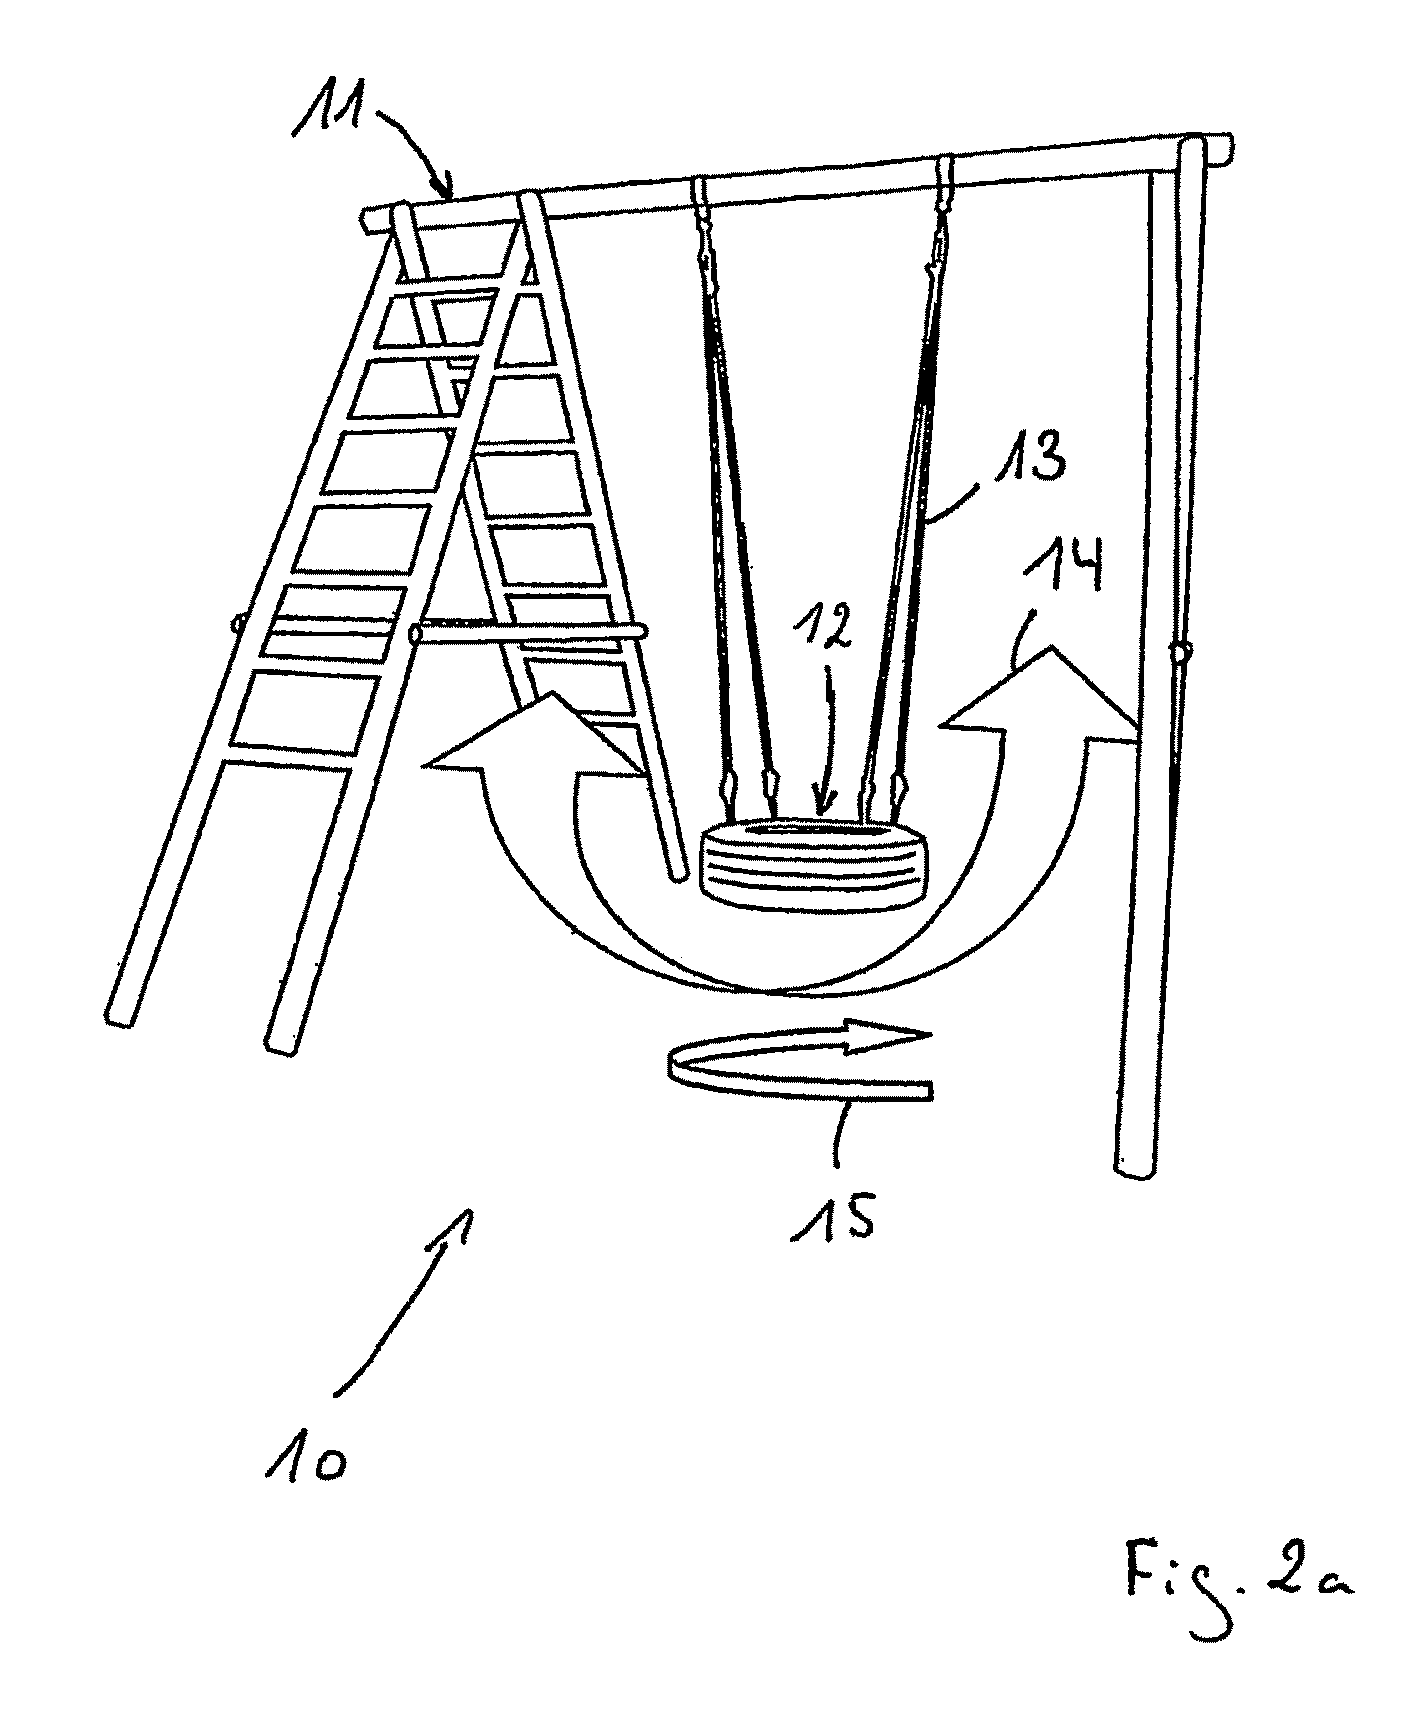 Playground device with motion dependent sound feedback